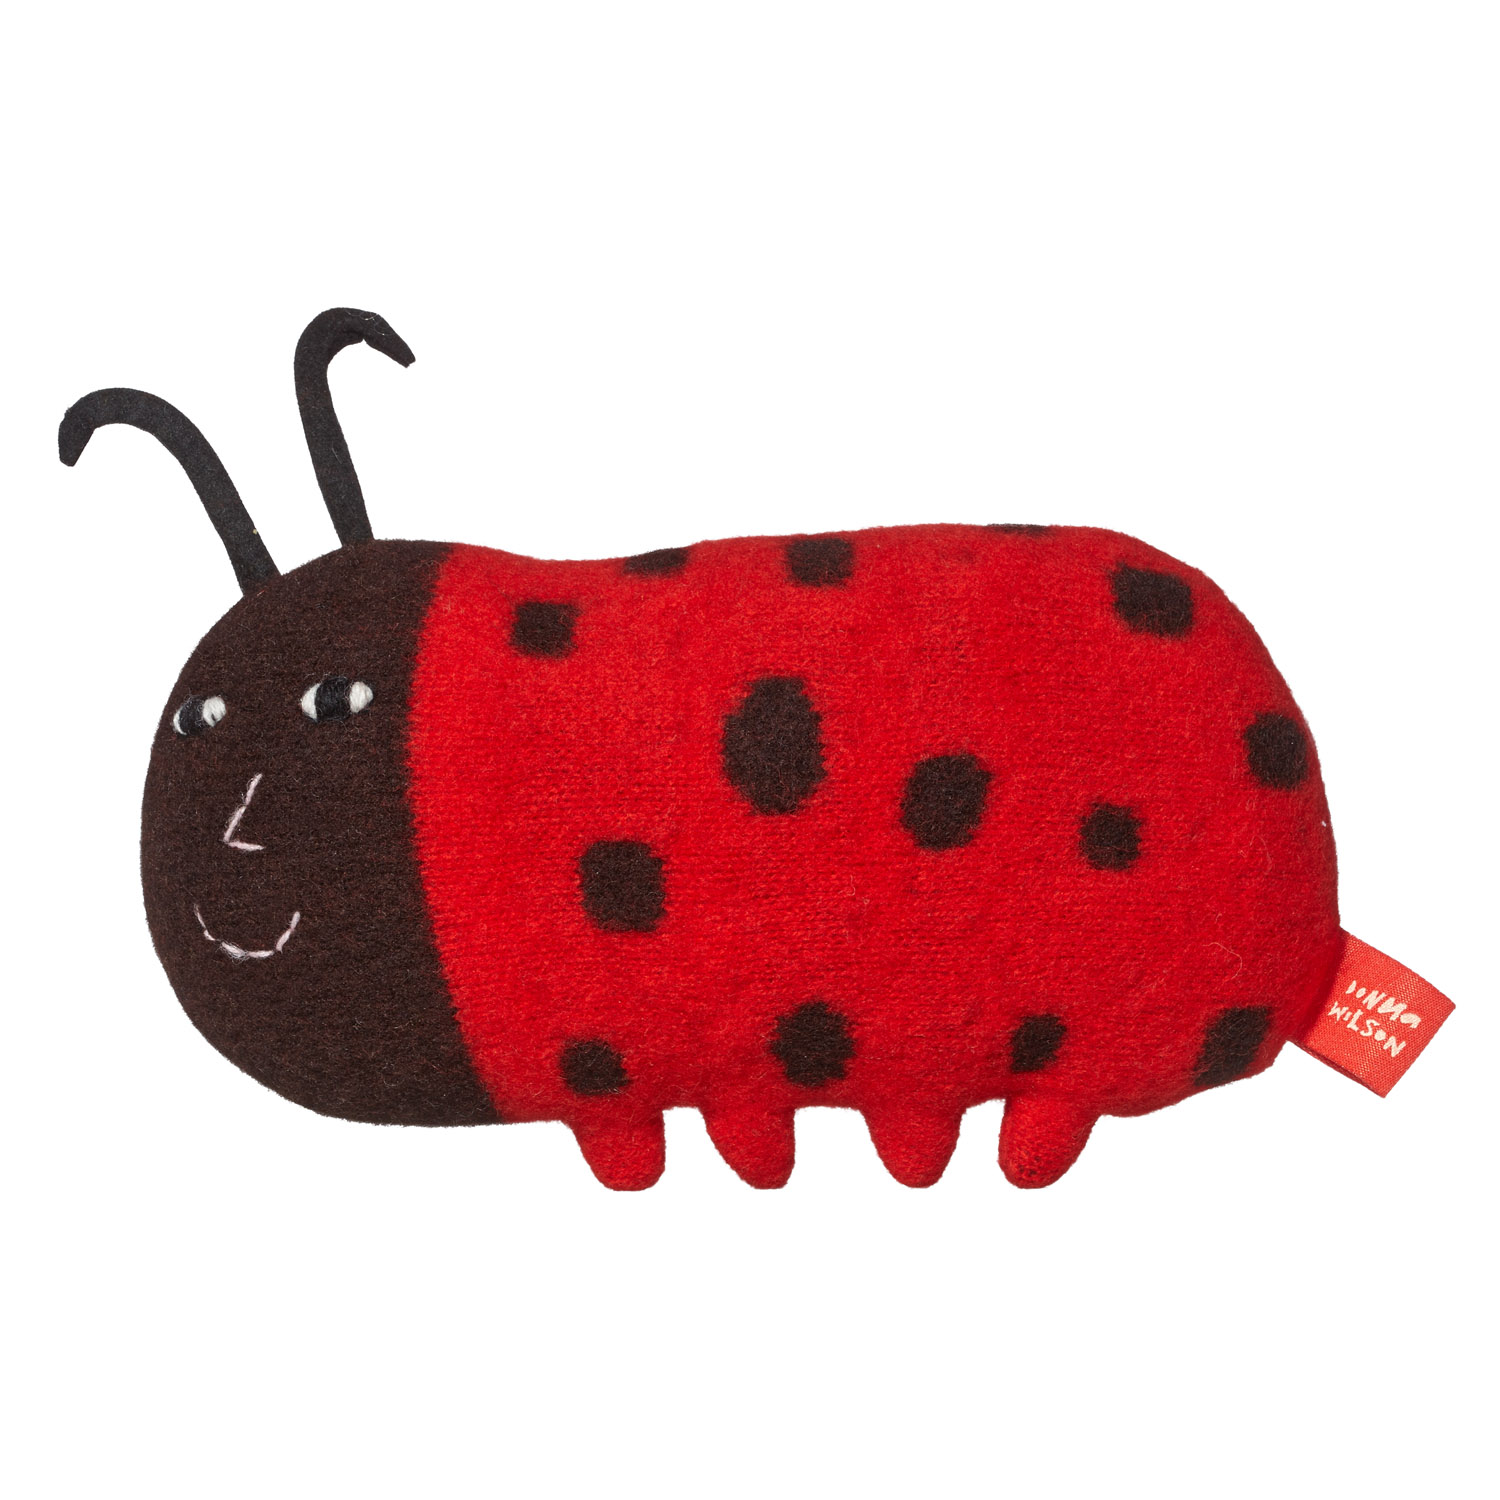 Larry Ladybird by Donna Wilson - 100% lambswool knitted creature ...